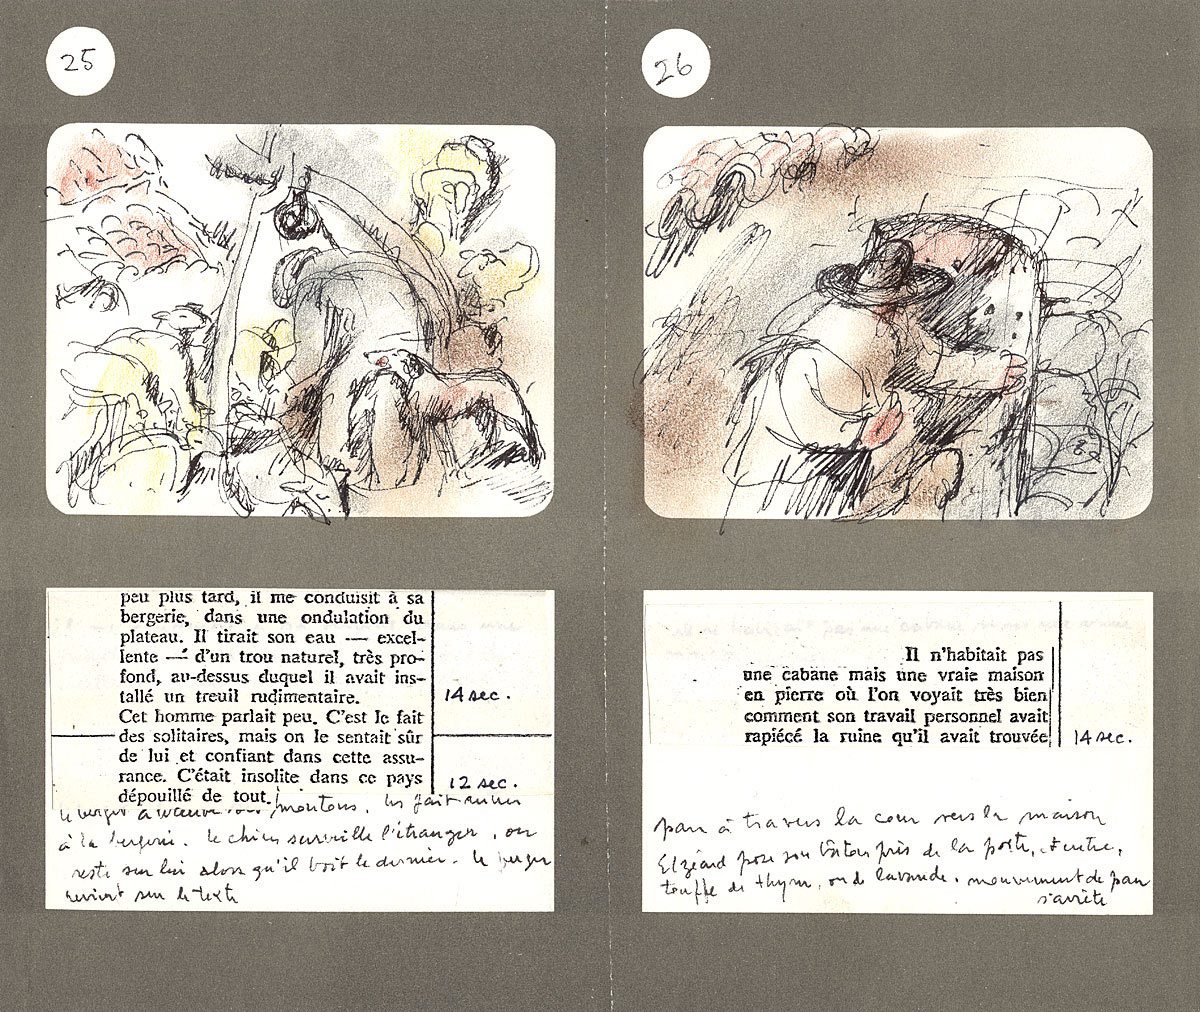 Storyboard panels from "The Man Who Planted Trees" by Frédéric Back.